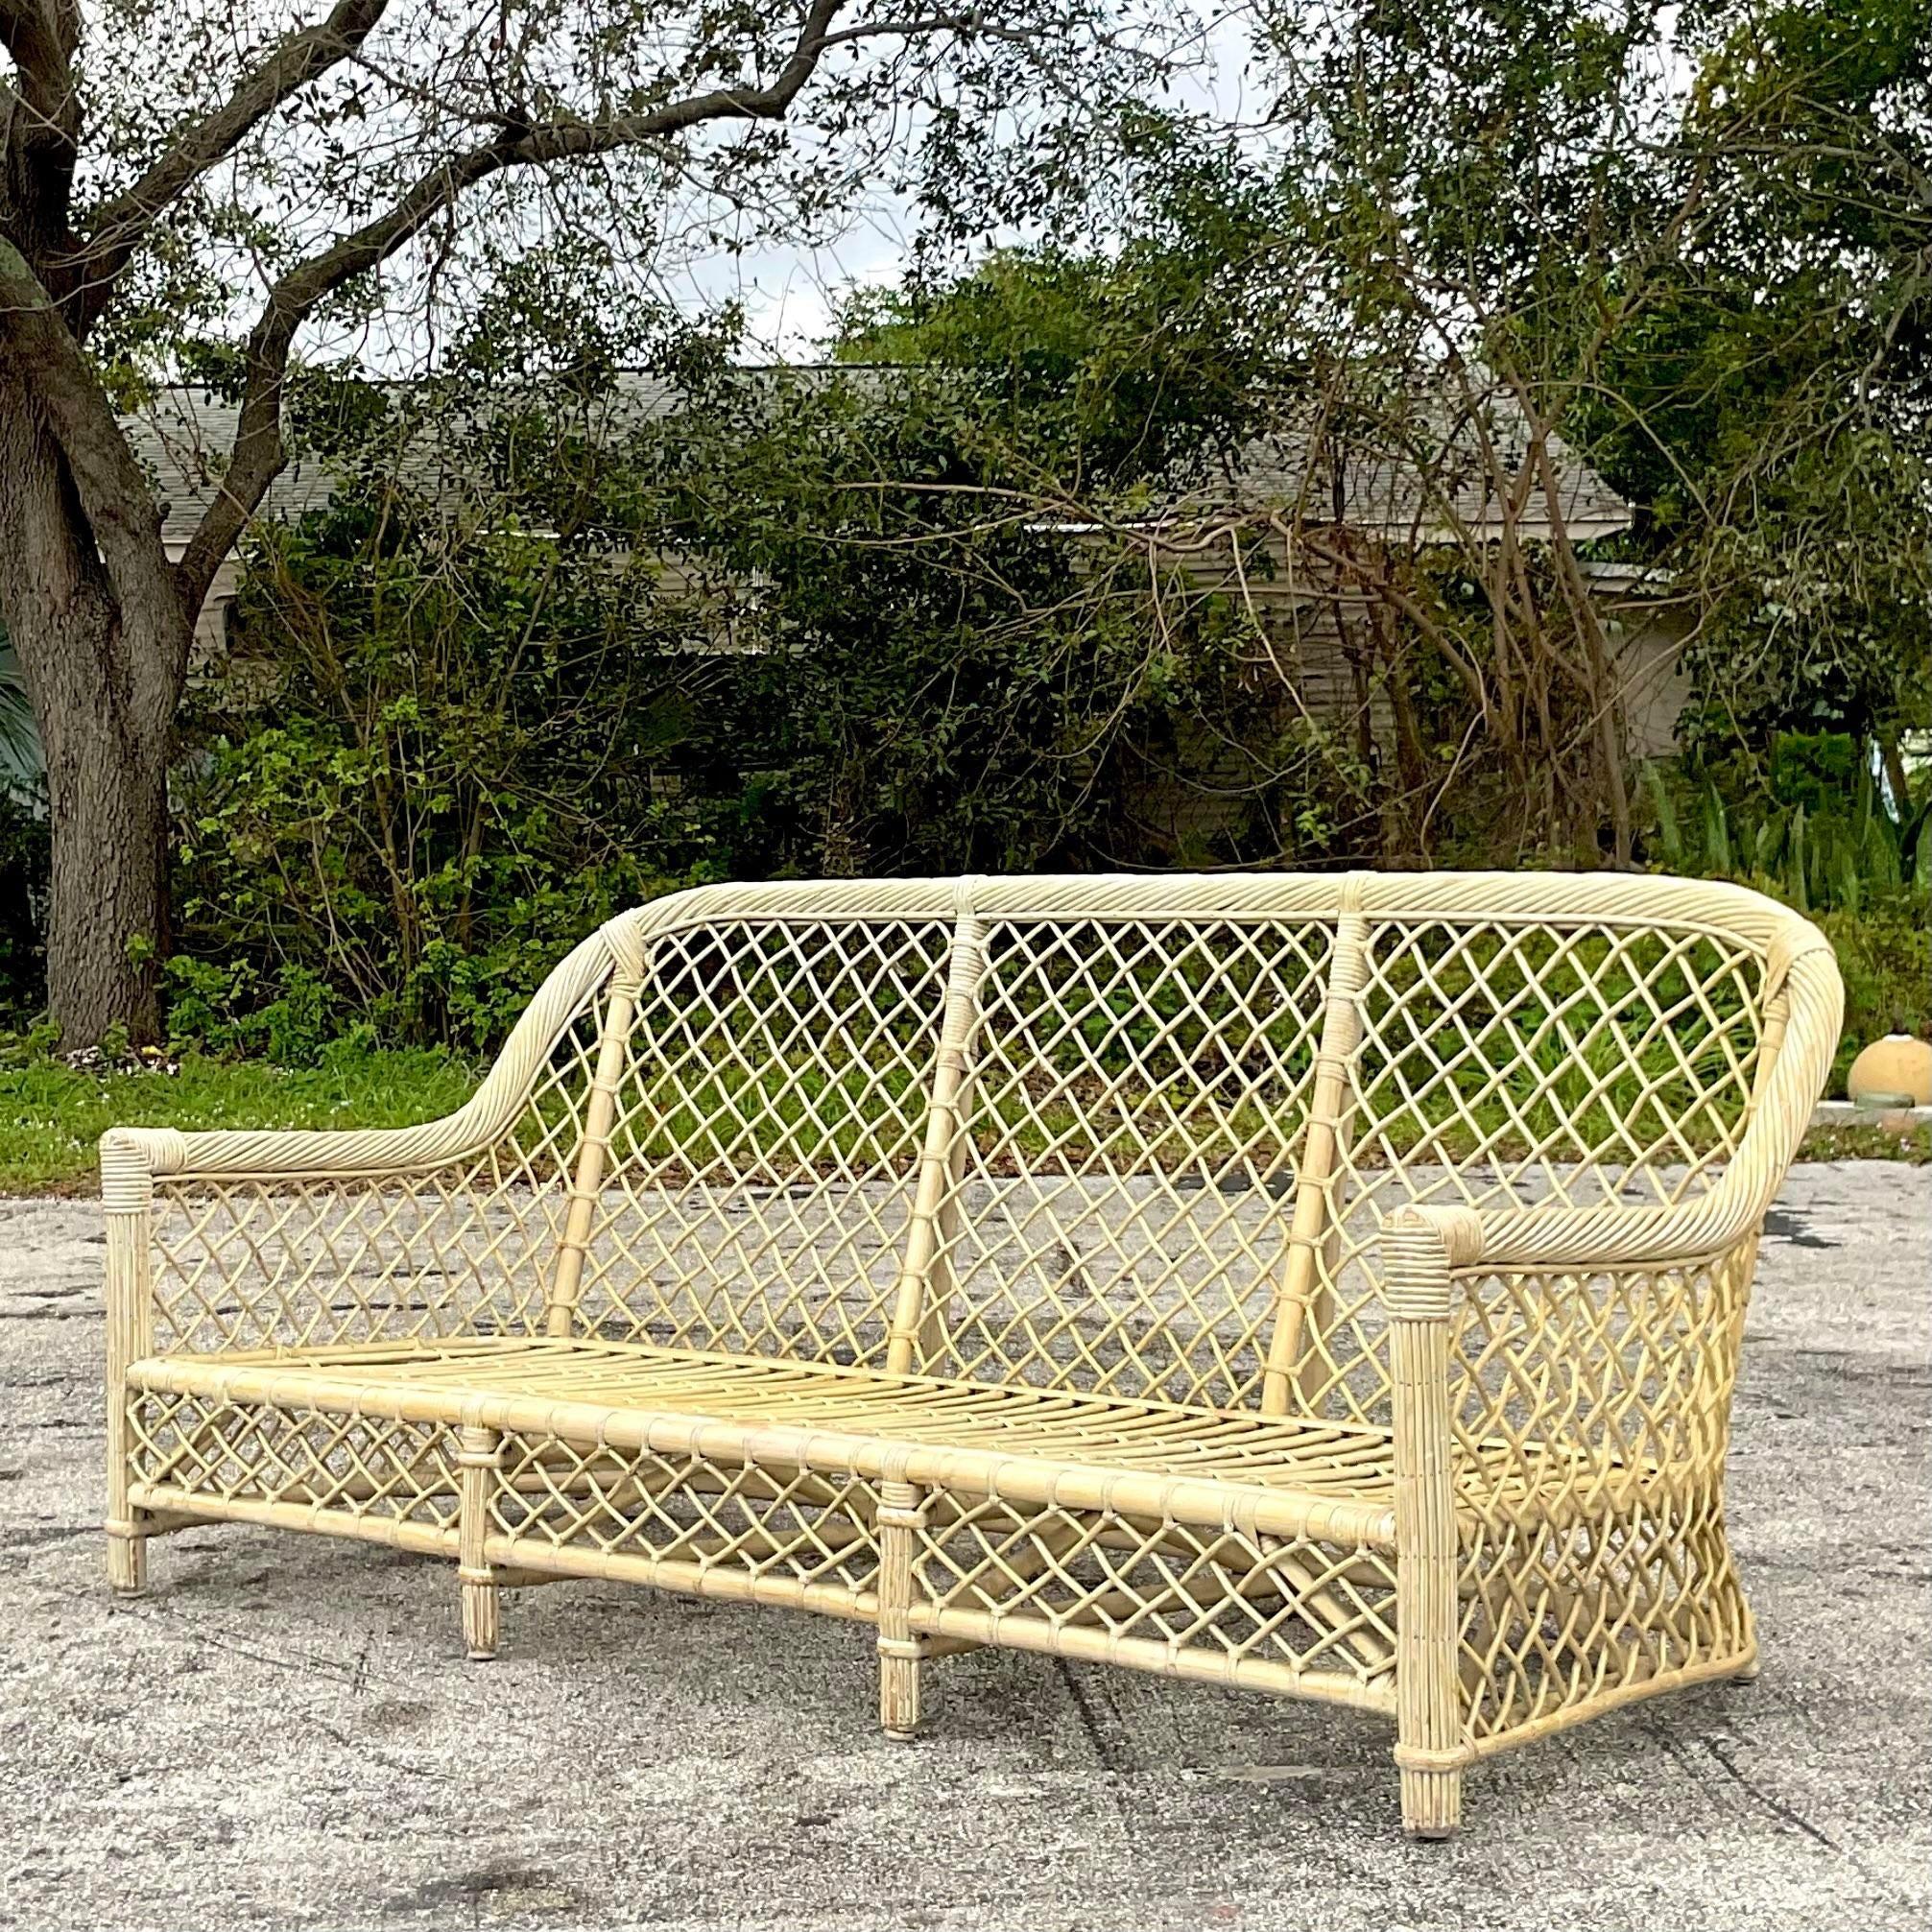  fantastic vintage Coastal sofa. A chic Deauville style trellis rattan in a pale green wash. Coordinating lounge chairs also available on my page. Acquired from a Palm Beach estate